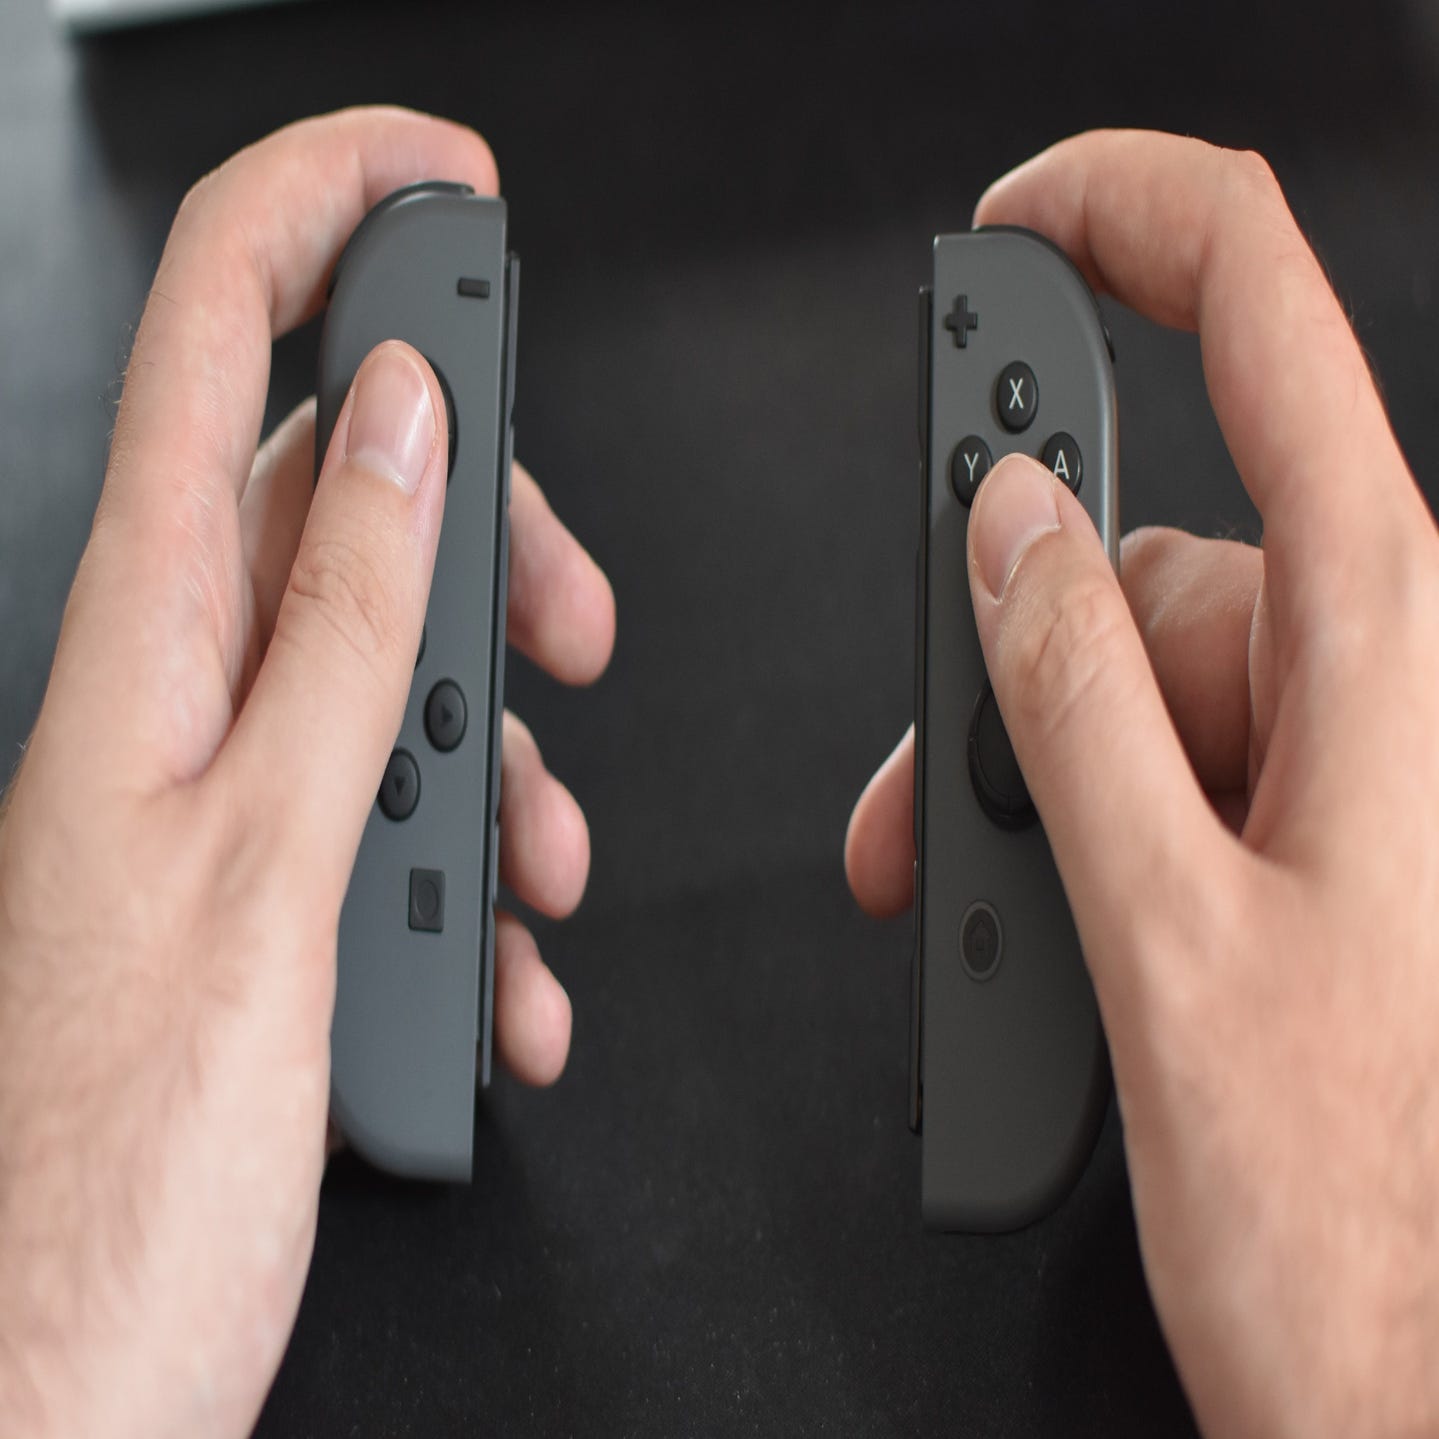 How to use Nintendo Switch Joy-Cons on PC